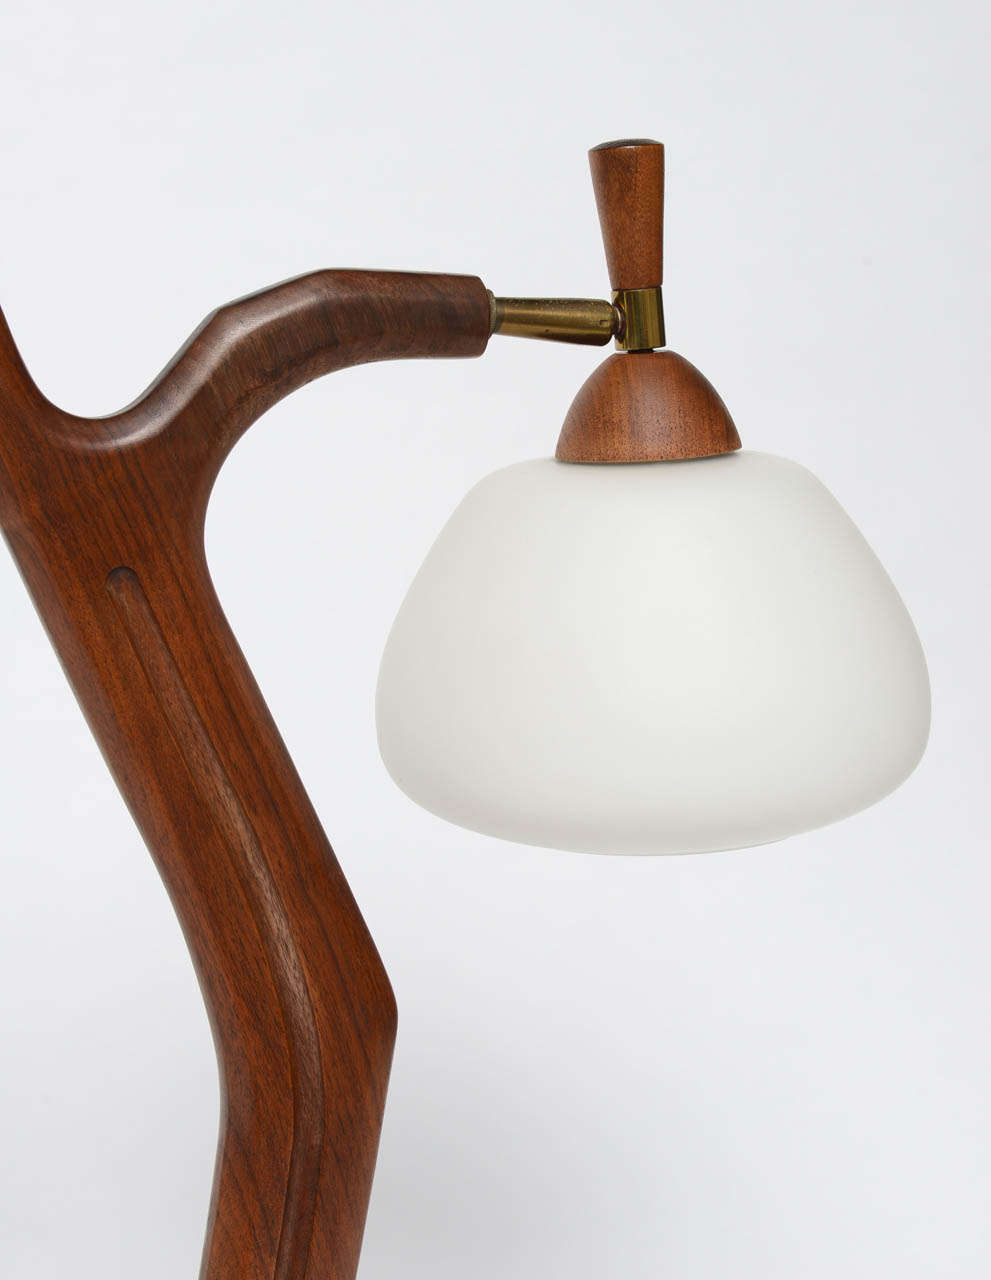 Strong Statement, Dramatic  Rare Scandinavian Wooden Table Lamp In Excellent Condition In Miami, Miami Design District, FL